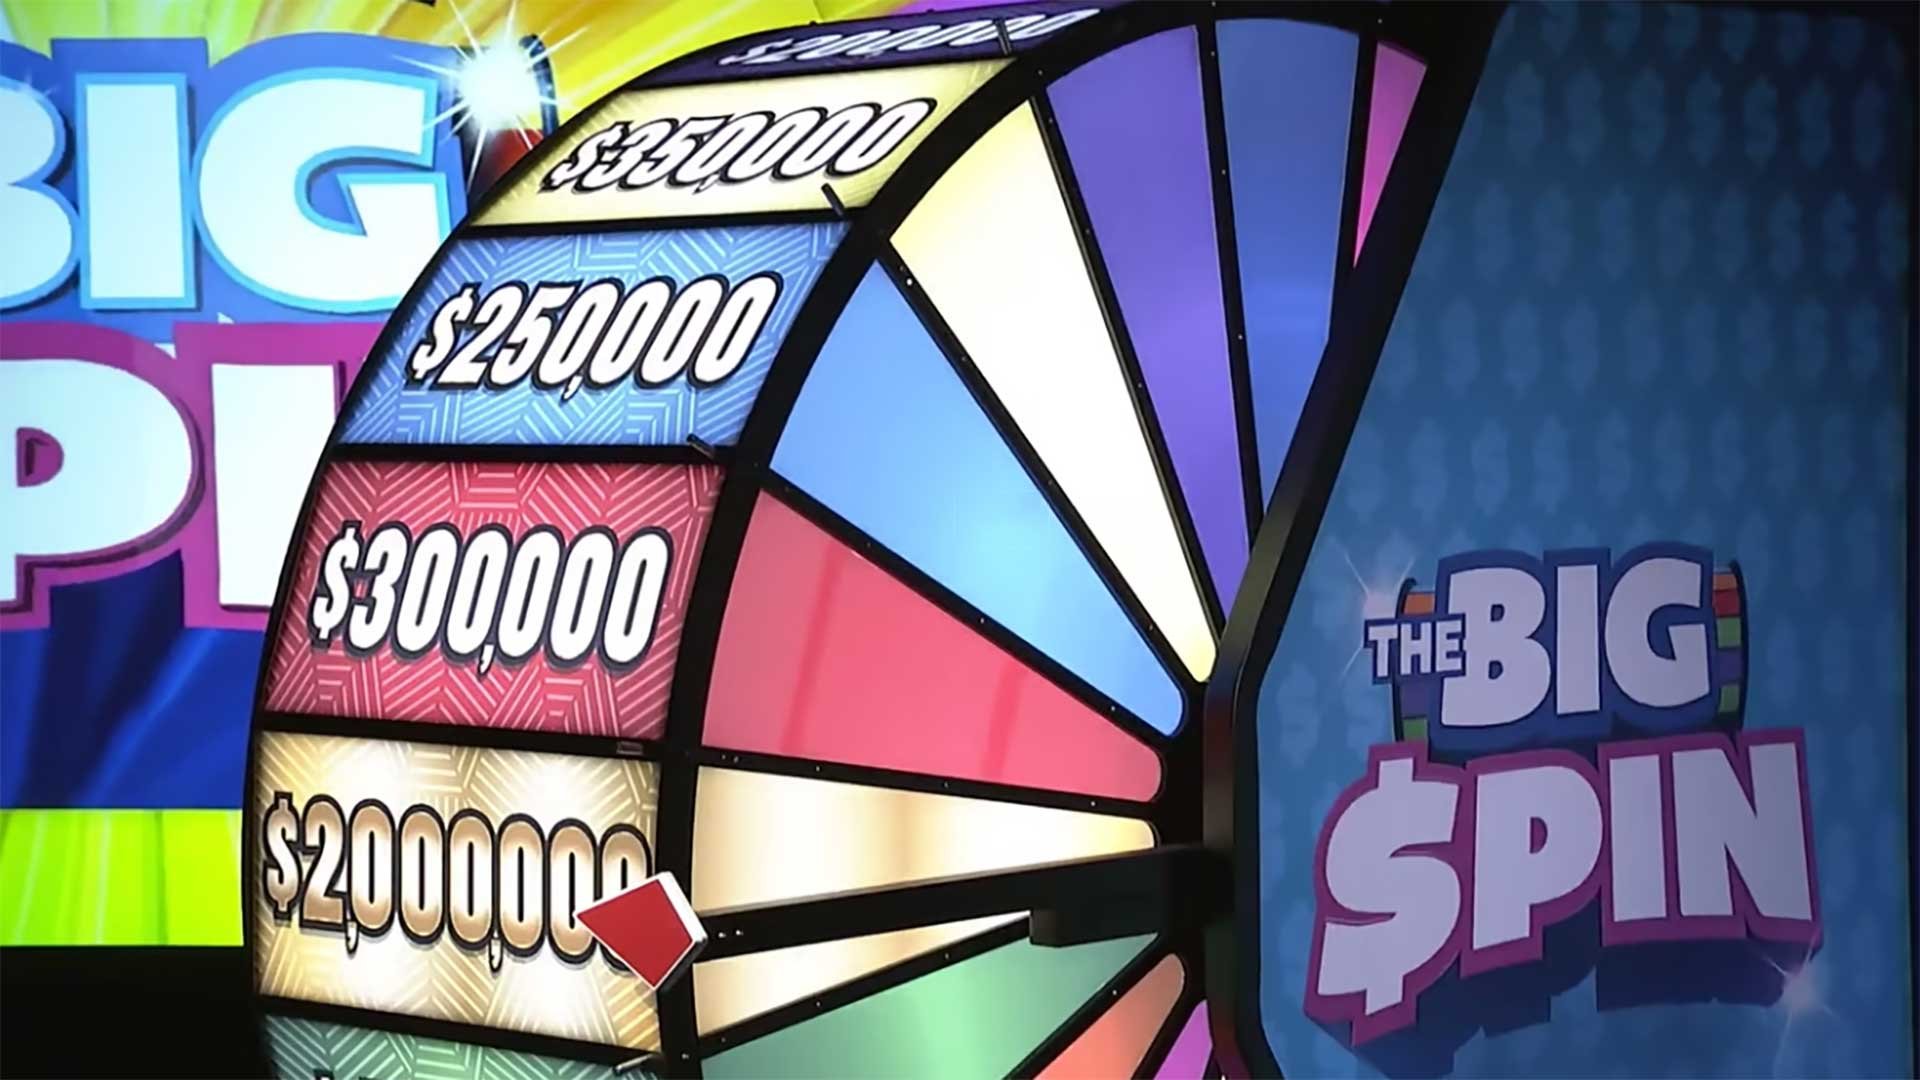 The Big Spin - $1 Million